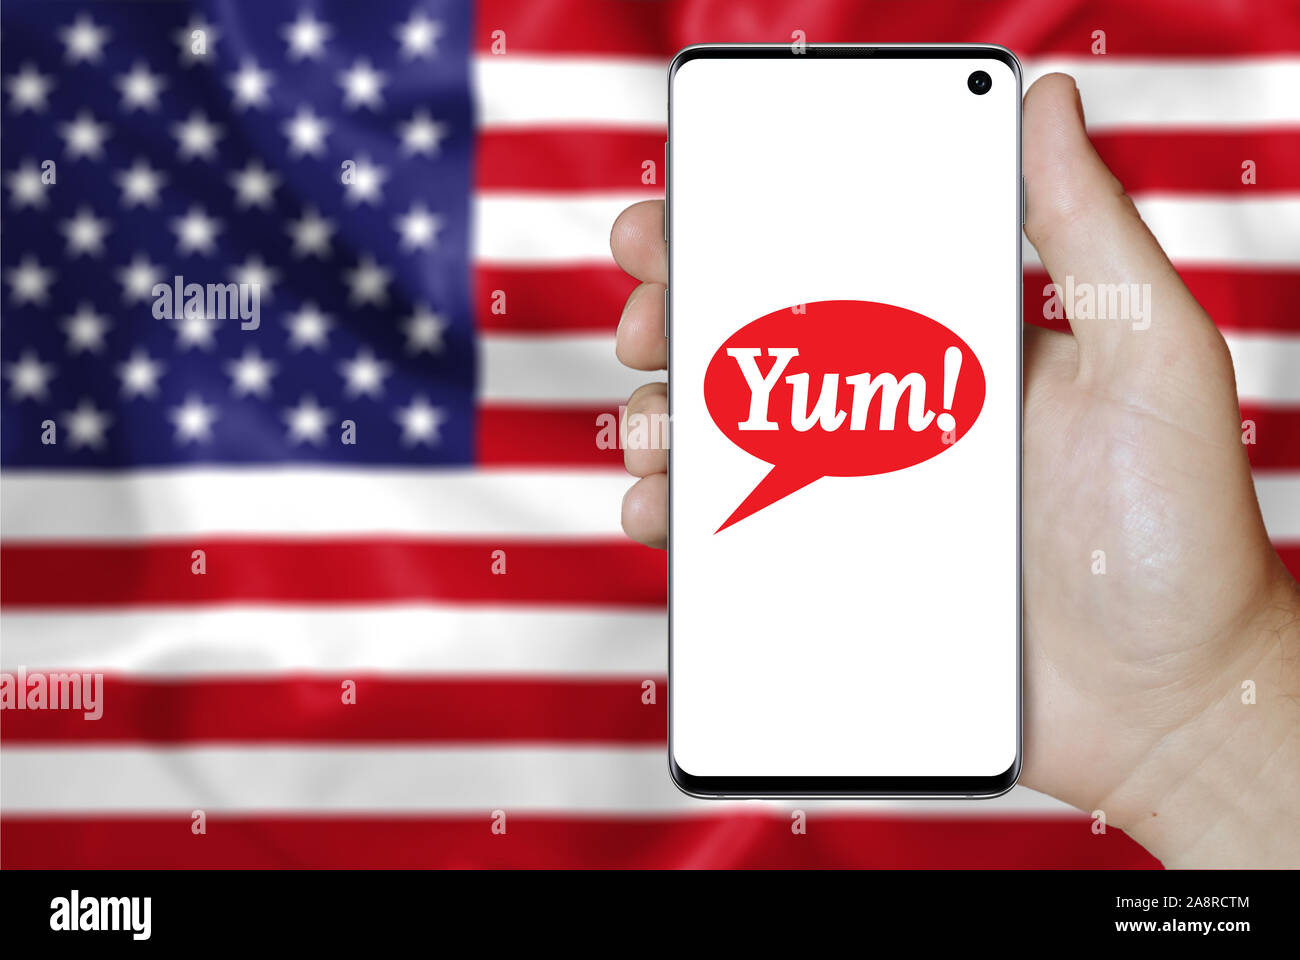 Logo of public company Yum! Brands Inc displayed on a smartphone. Flag of USA background. Credit: PIXDUCE Stock Photo